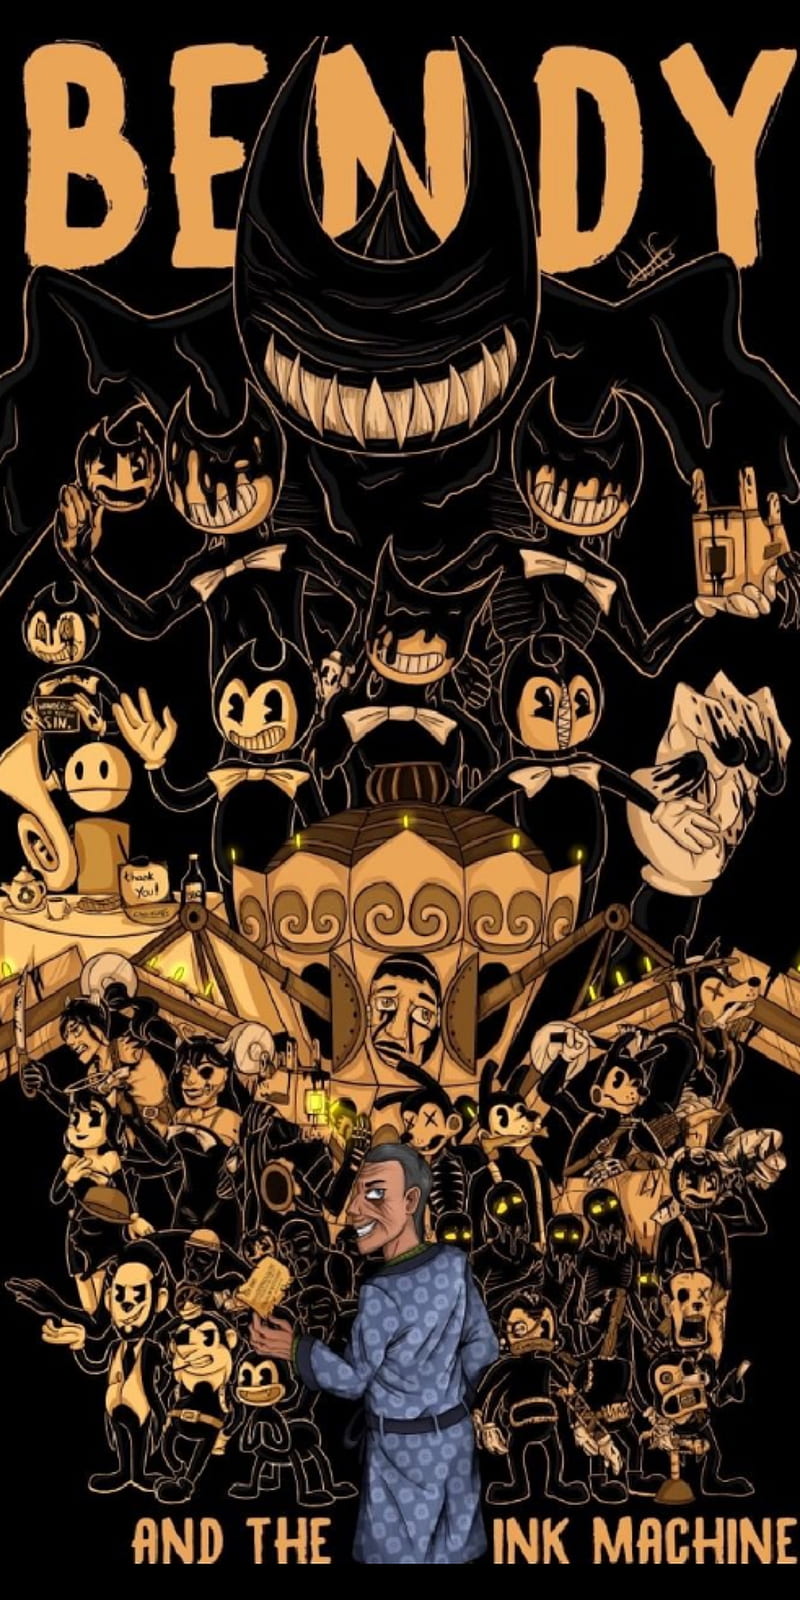 Download Boris (Bendy And The Ink Machine) wallpapers for mobile